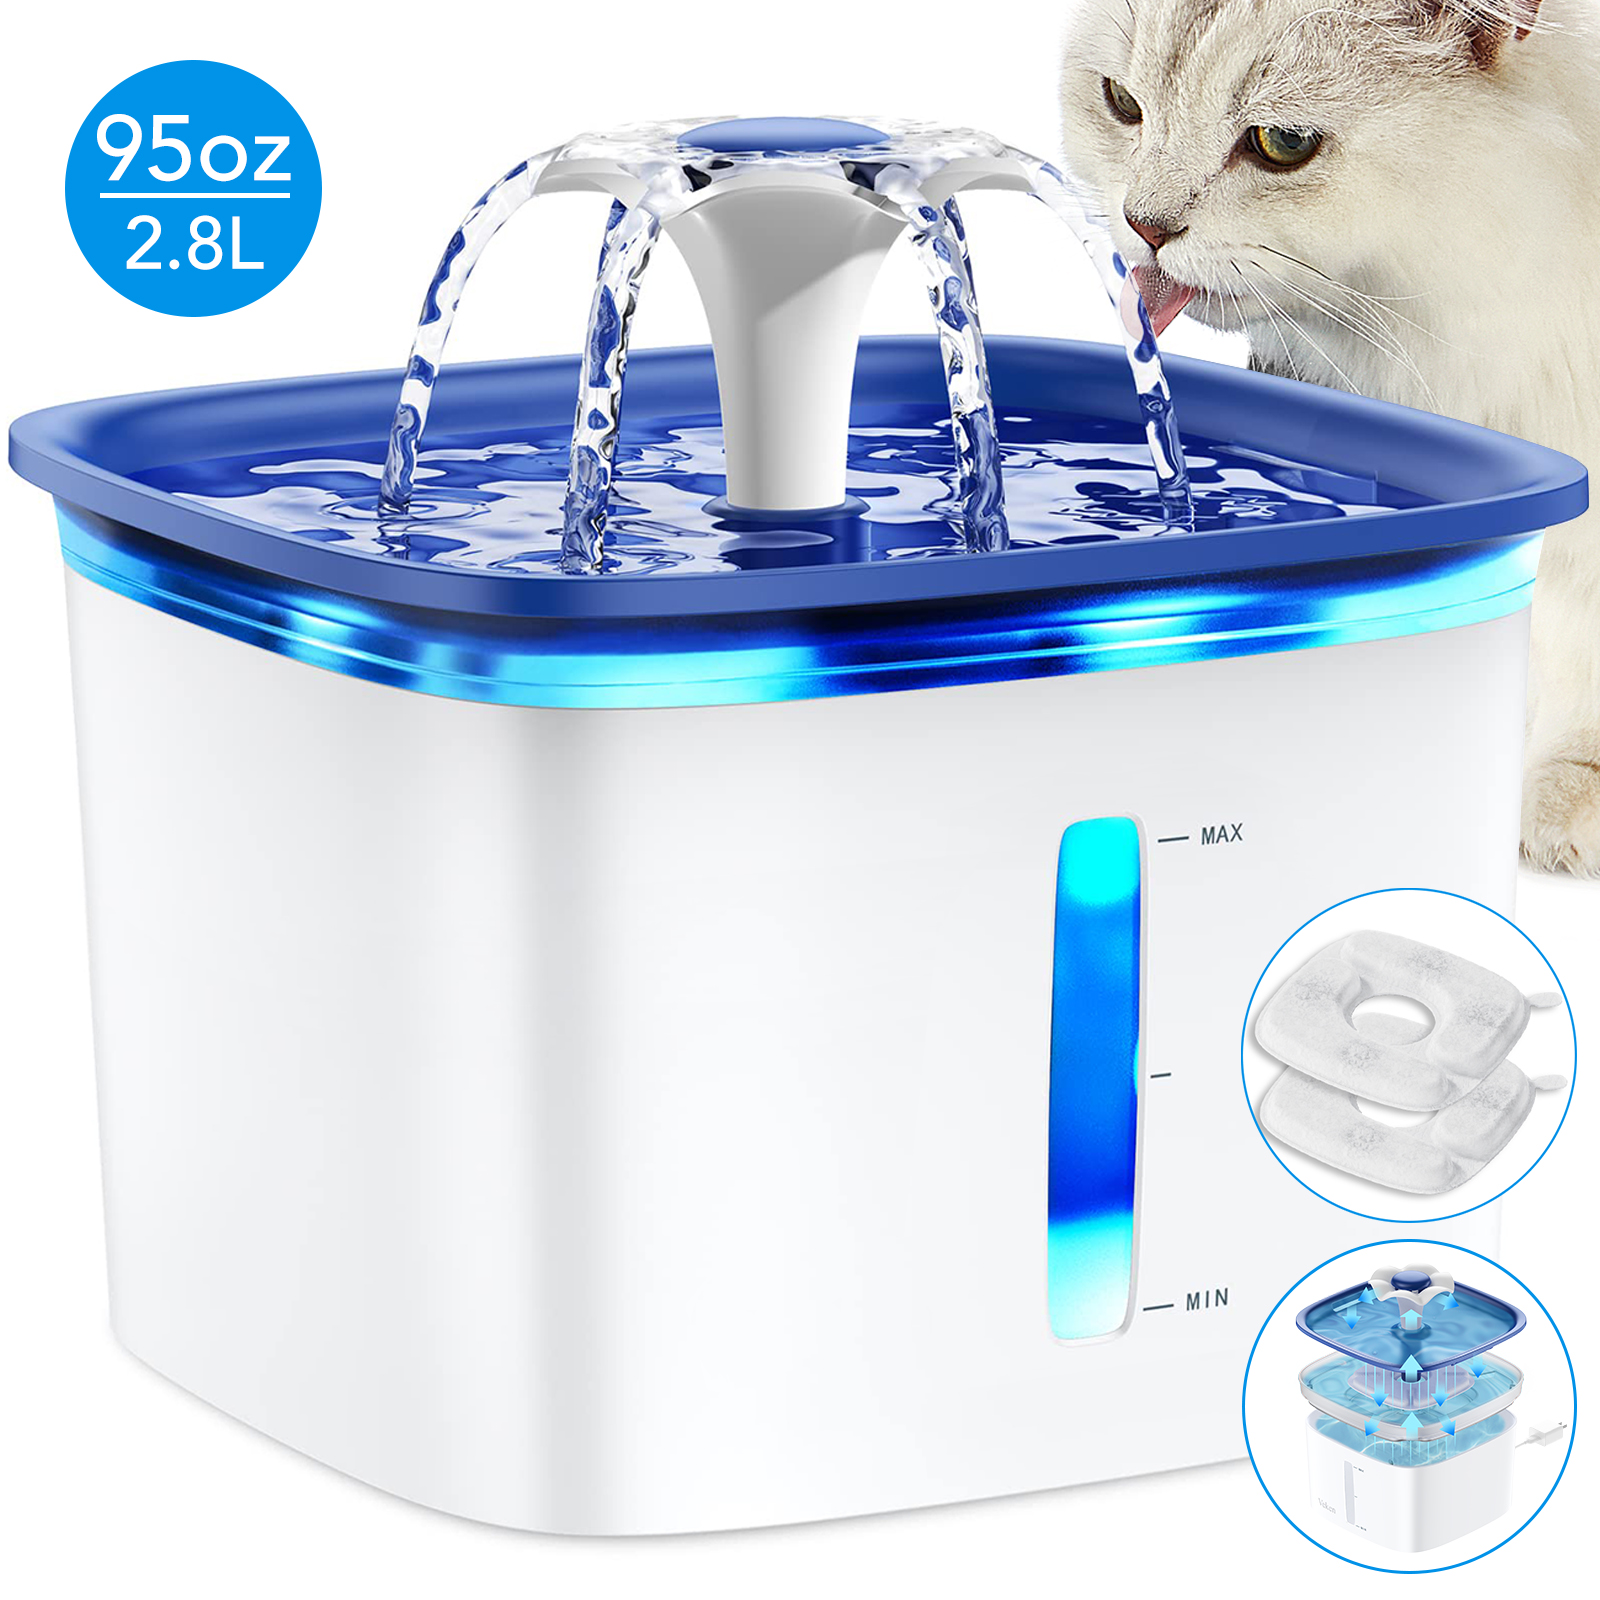 Automatic Pet Water Fountain 95oz/2.8L with Replacement Filters, Electric Water Bowl for Cats, Dogs, Multiple Pets, Cat & Dog Water Dispenser with Efficient Pump, Blue, Plastic - image 1 of 11